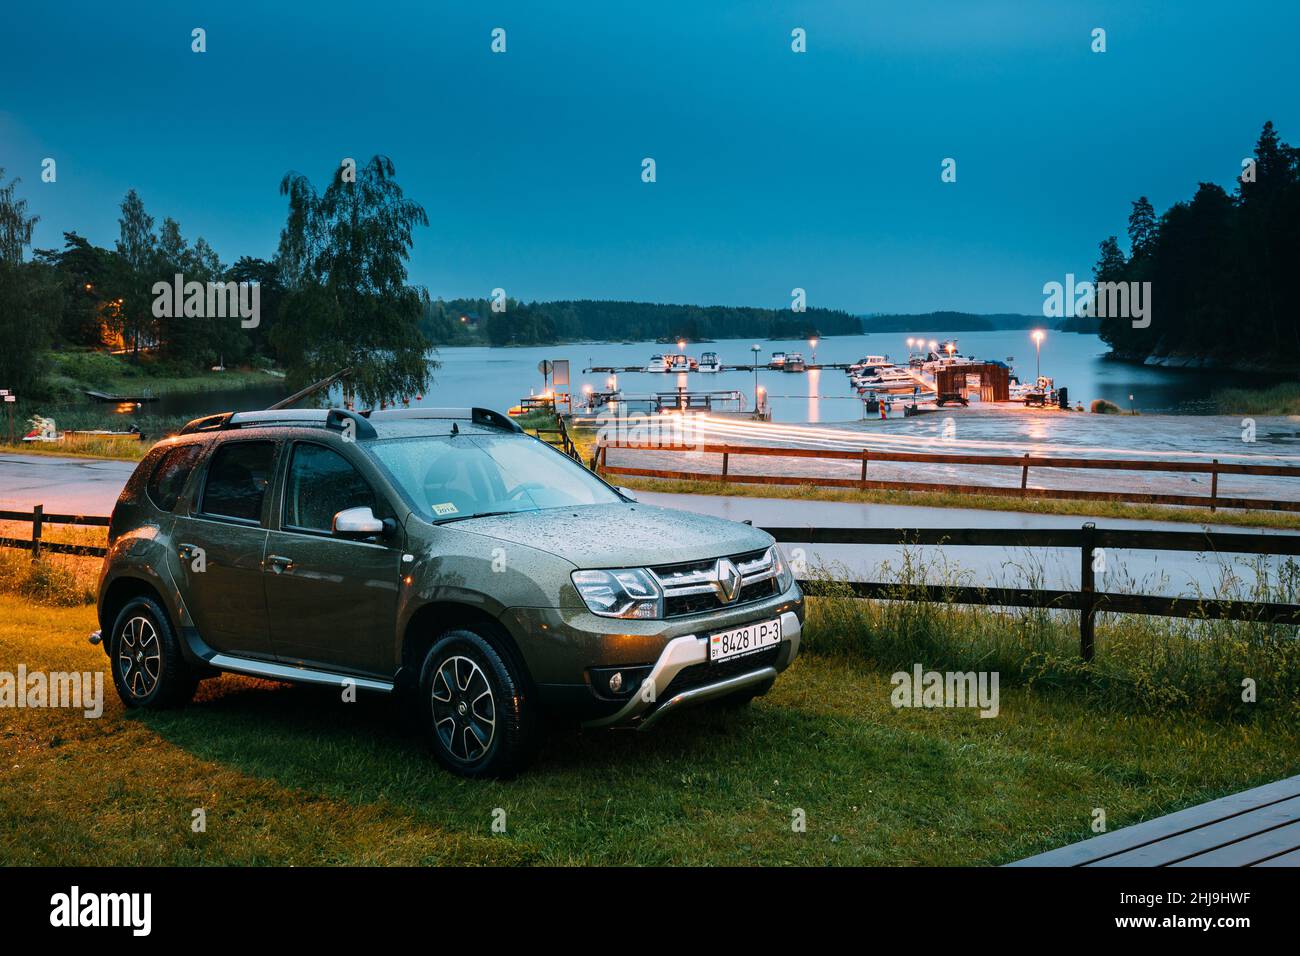 Tocksfors, Sweden. Car Renault Duster SUV Parked Near Lake Or River Landscape In Swedish Countryside Landscape. Summer Evening Night Stock Photo